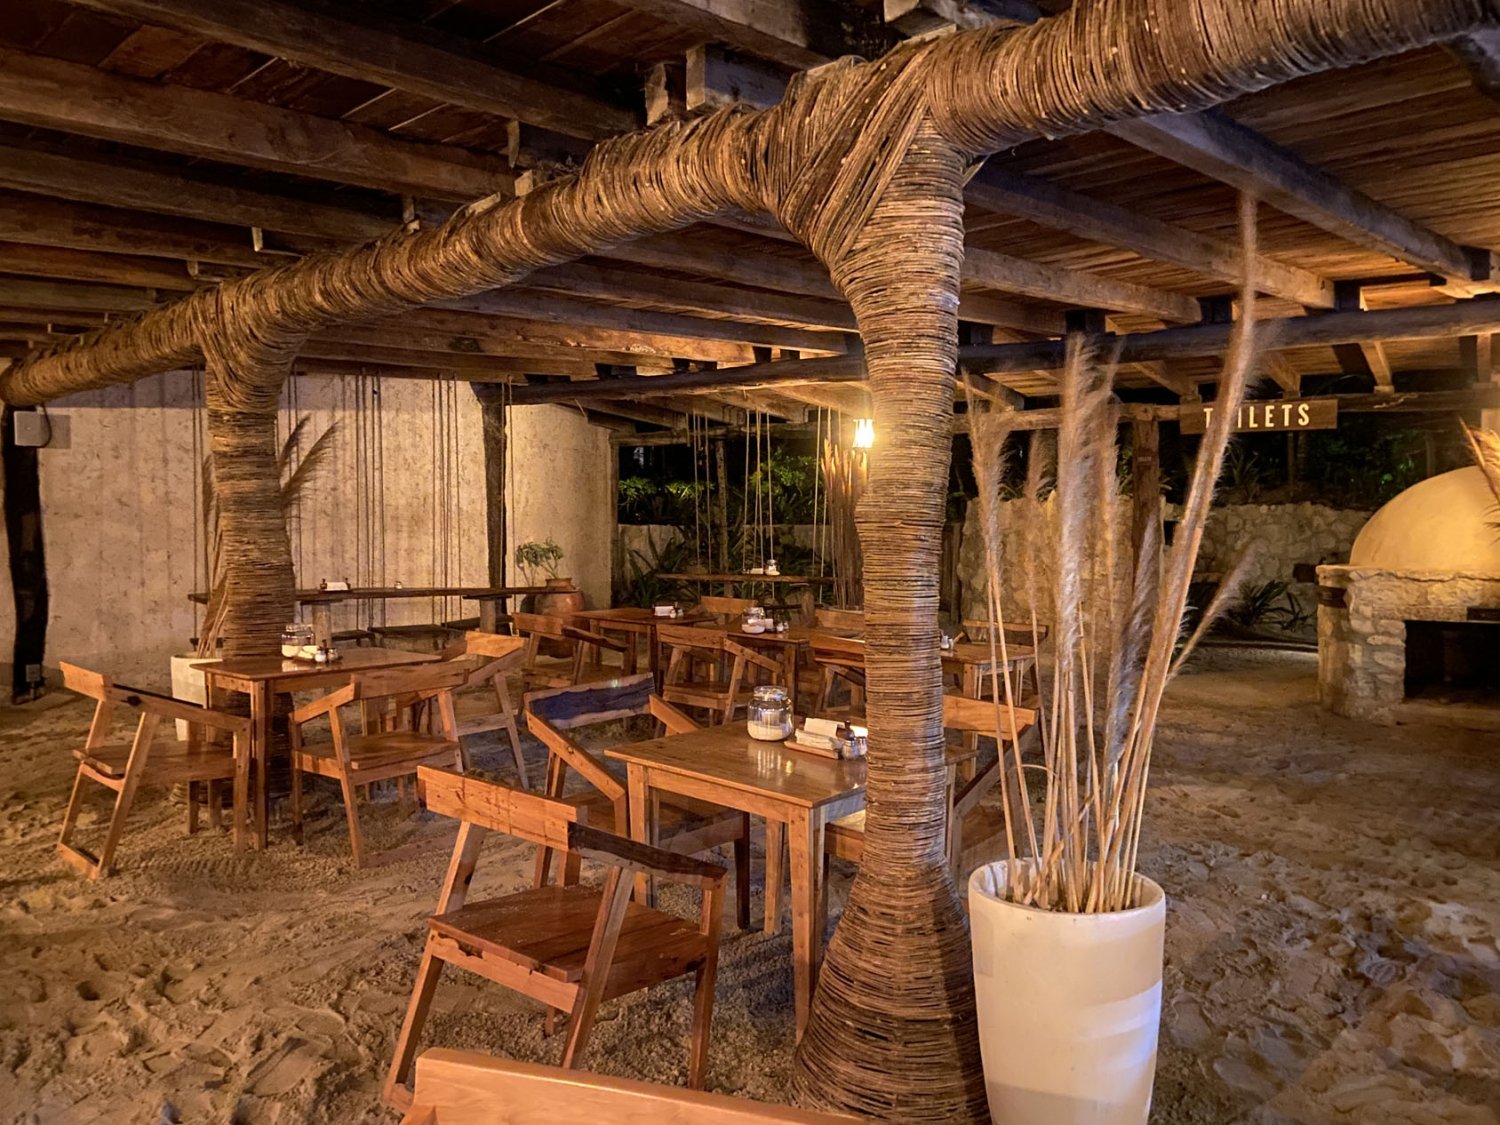 Restaurants with contemporary food in Tulum